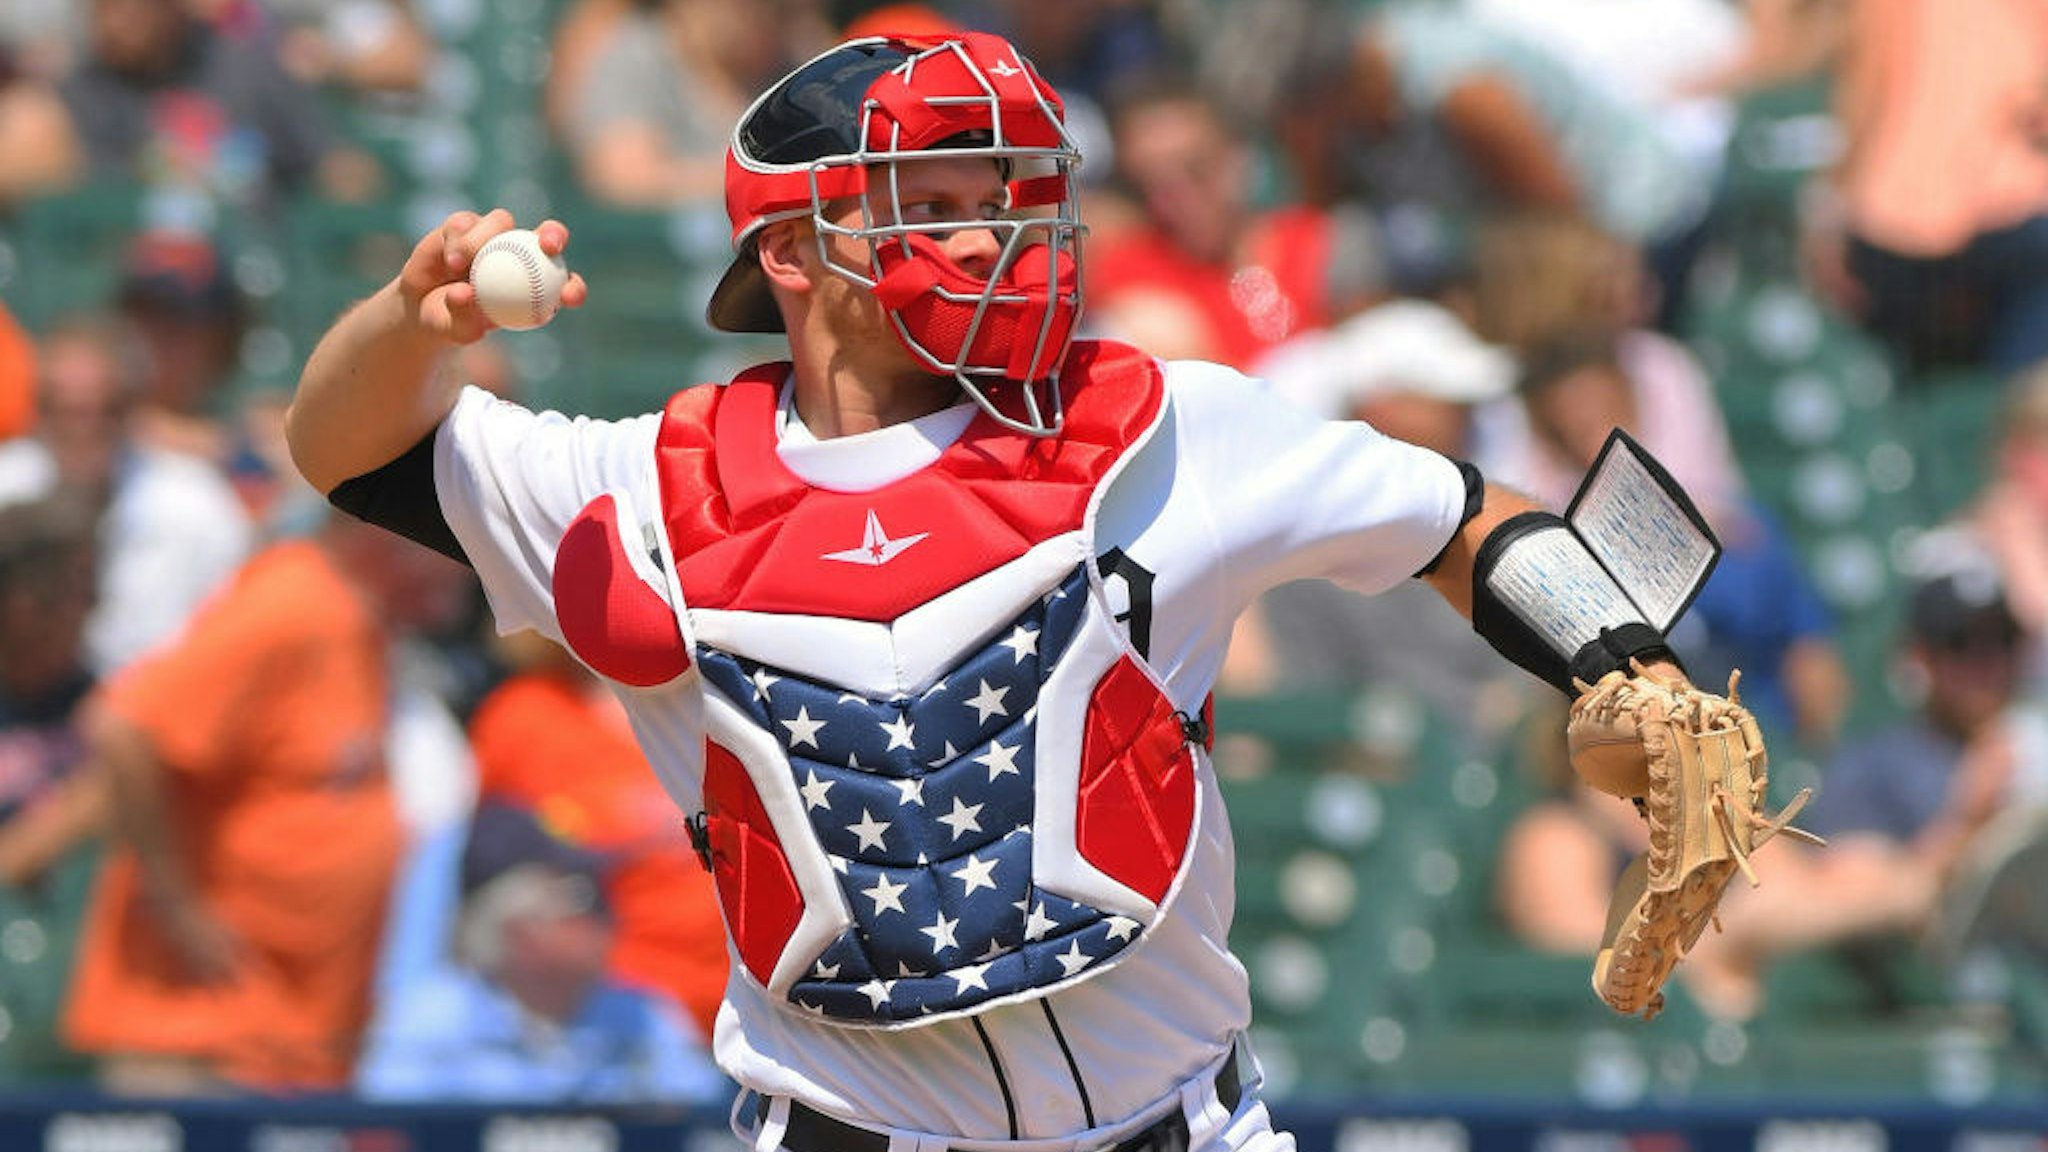 John Hicks #55 of the Detroit Tigers throws a baseball while wearing red, white and blue catchers gear to honor 4th of July weekend during the game against the Boston Red Sox at Comerica Park on July 7, 2019 in Detroit, Michigan.